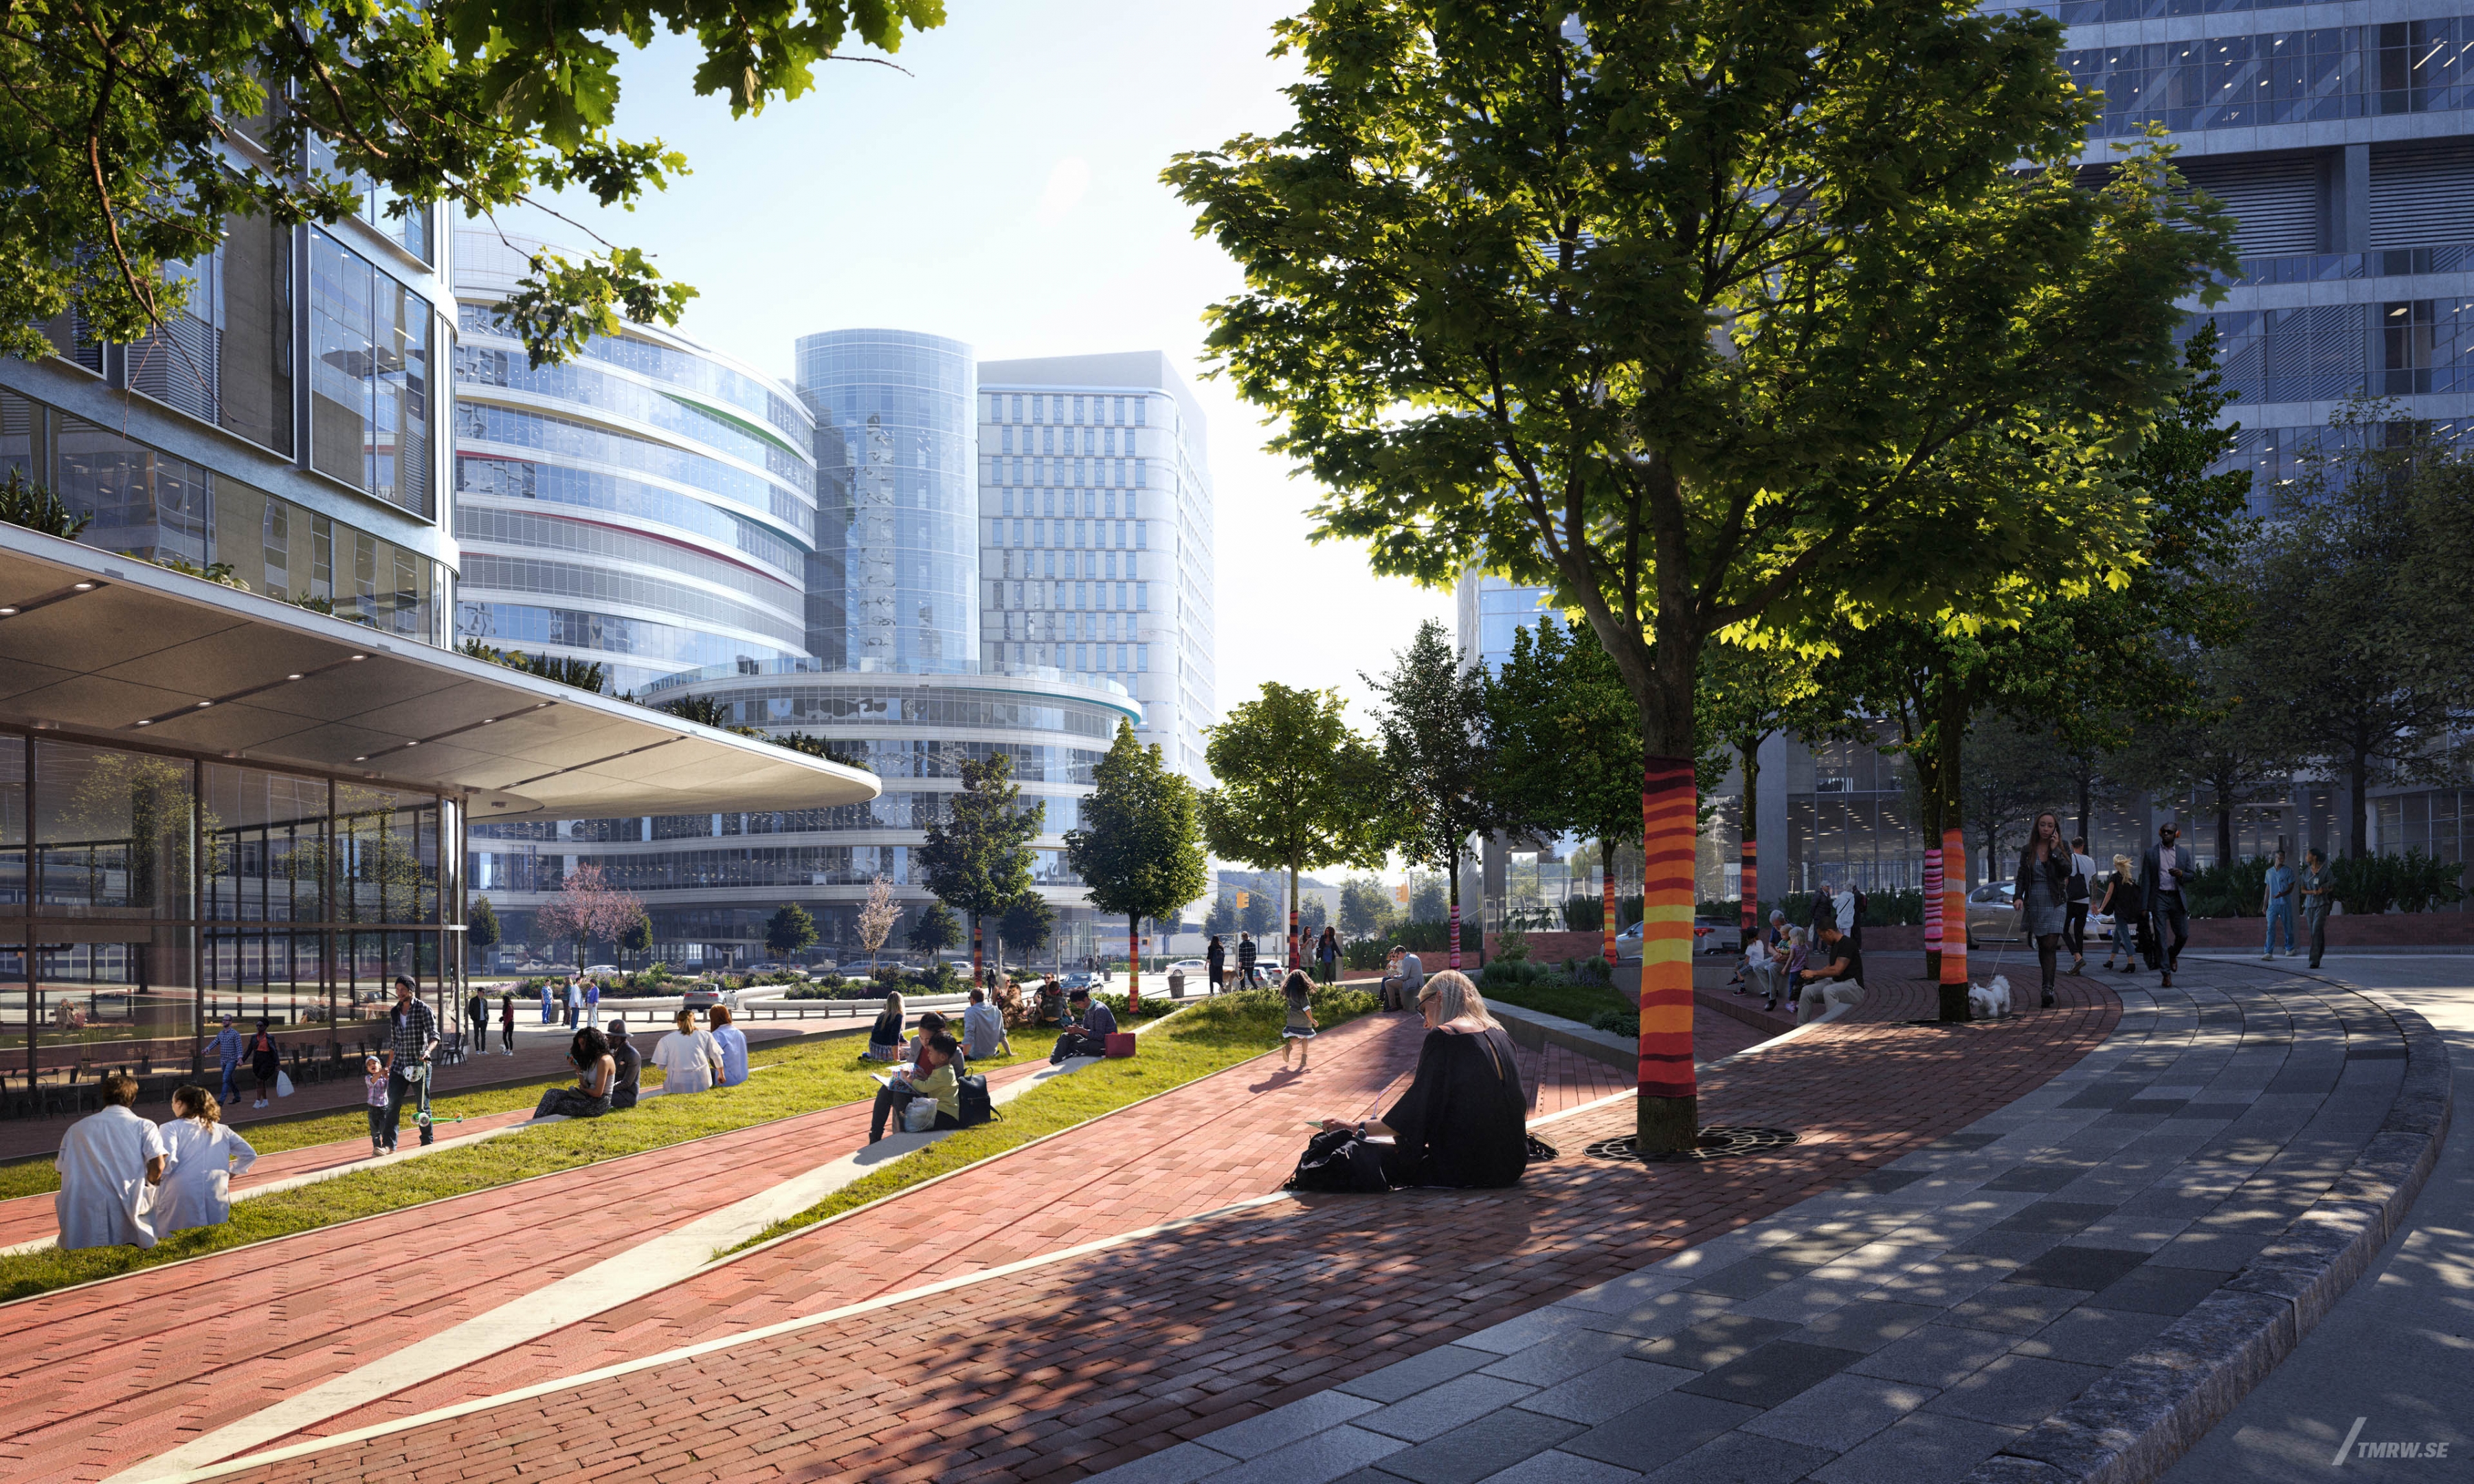 Architectural visualization of CHOP for Cooper Robertson, an civic area in day light from a street view.